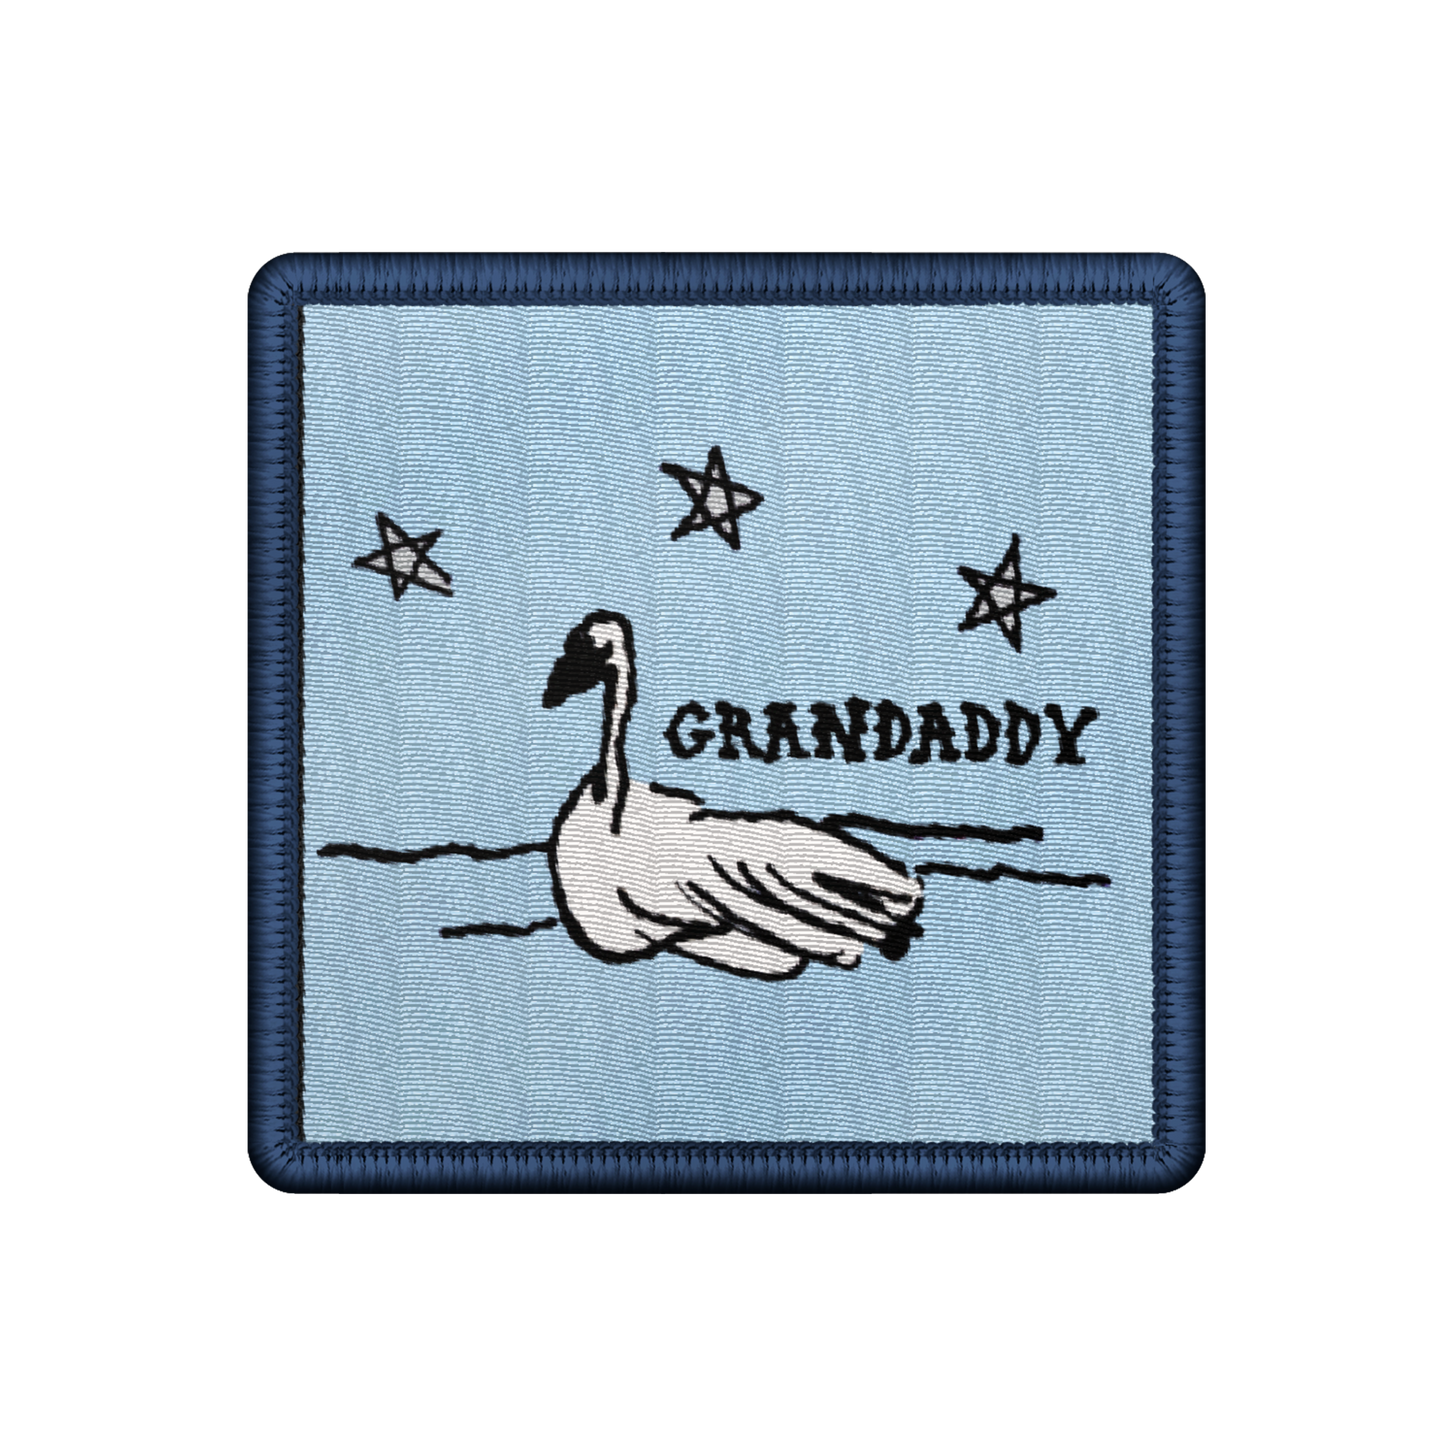 Grandaddy - Sumday Swan - Embroidered Patch